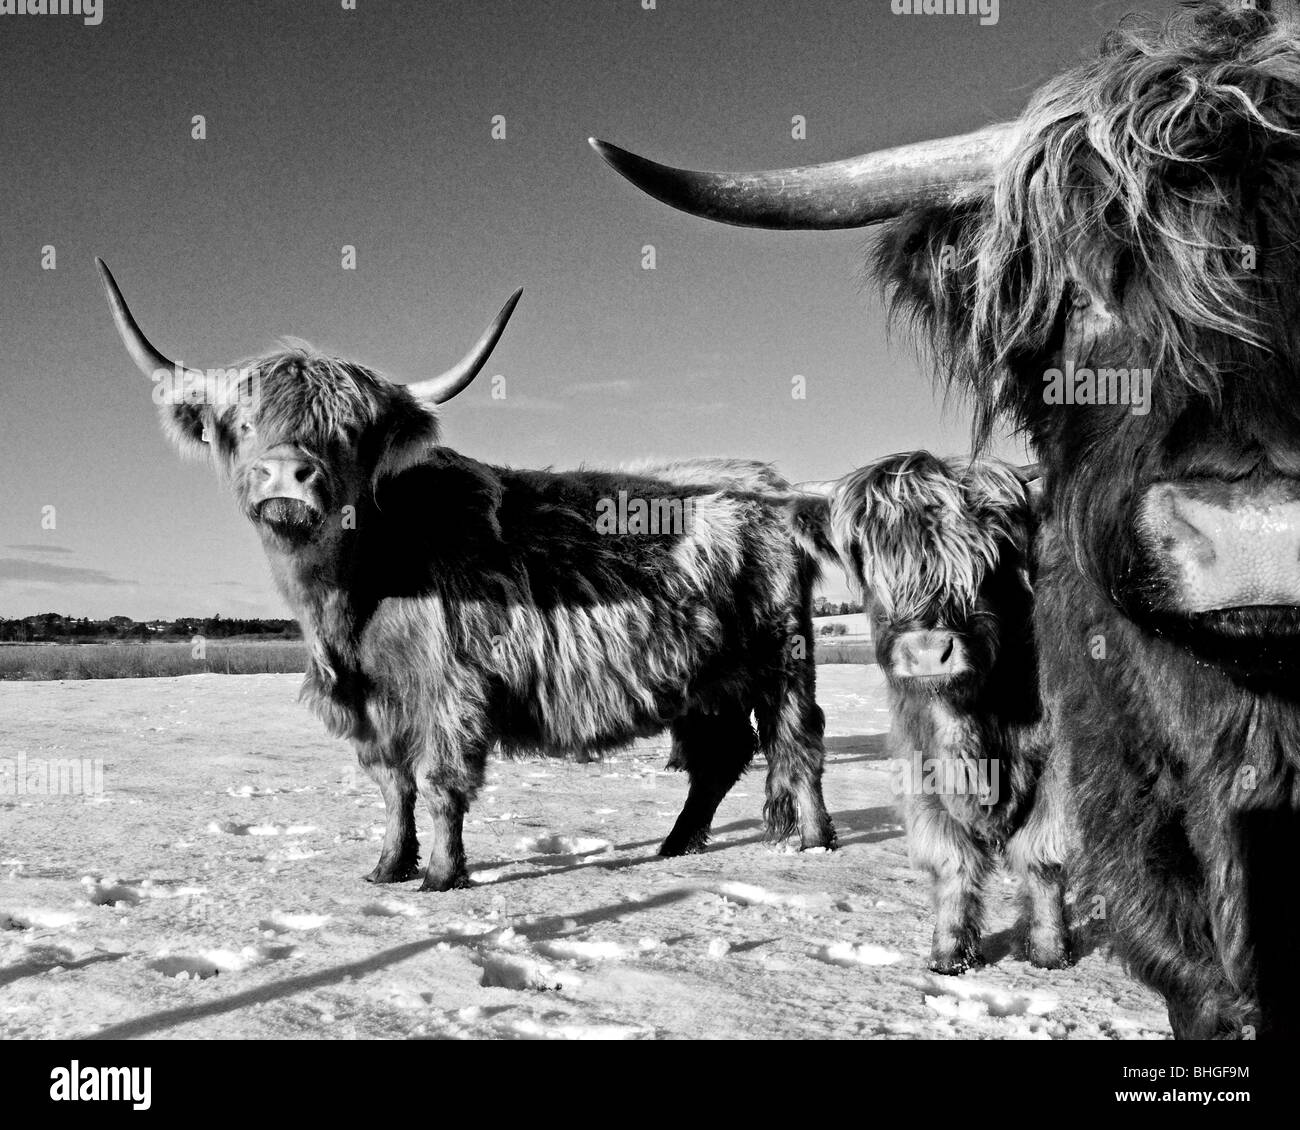 A photograph of Highland Cattle in winter surroundings Stock Photo